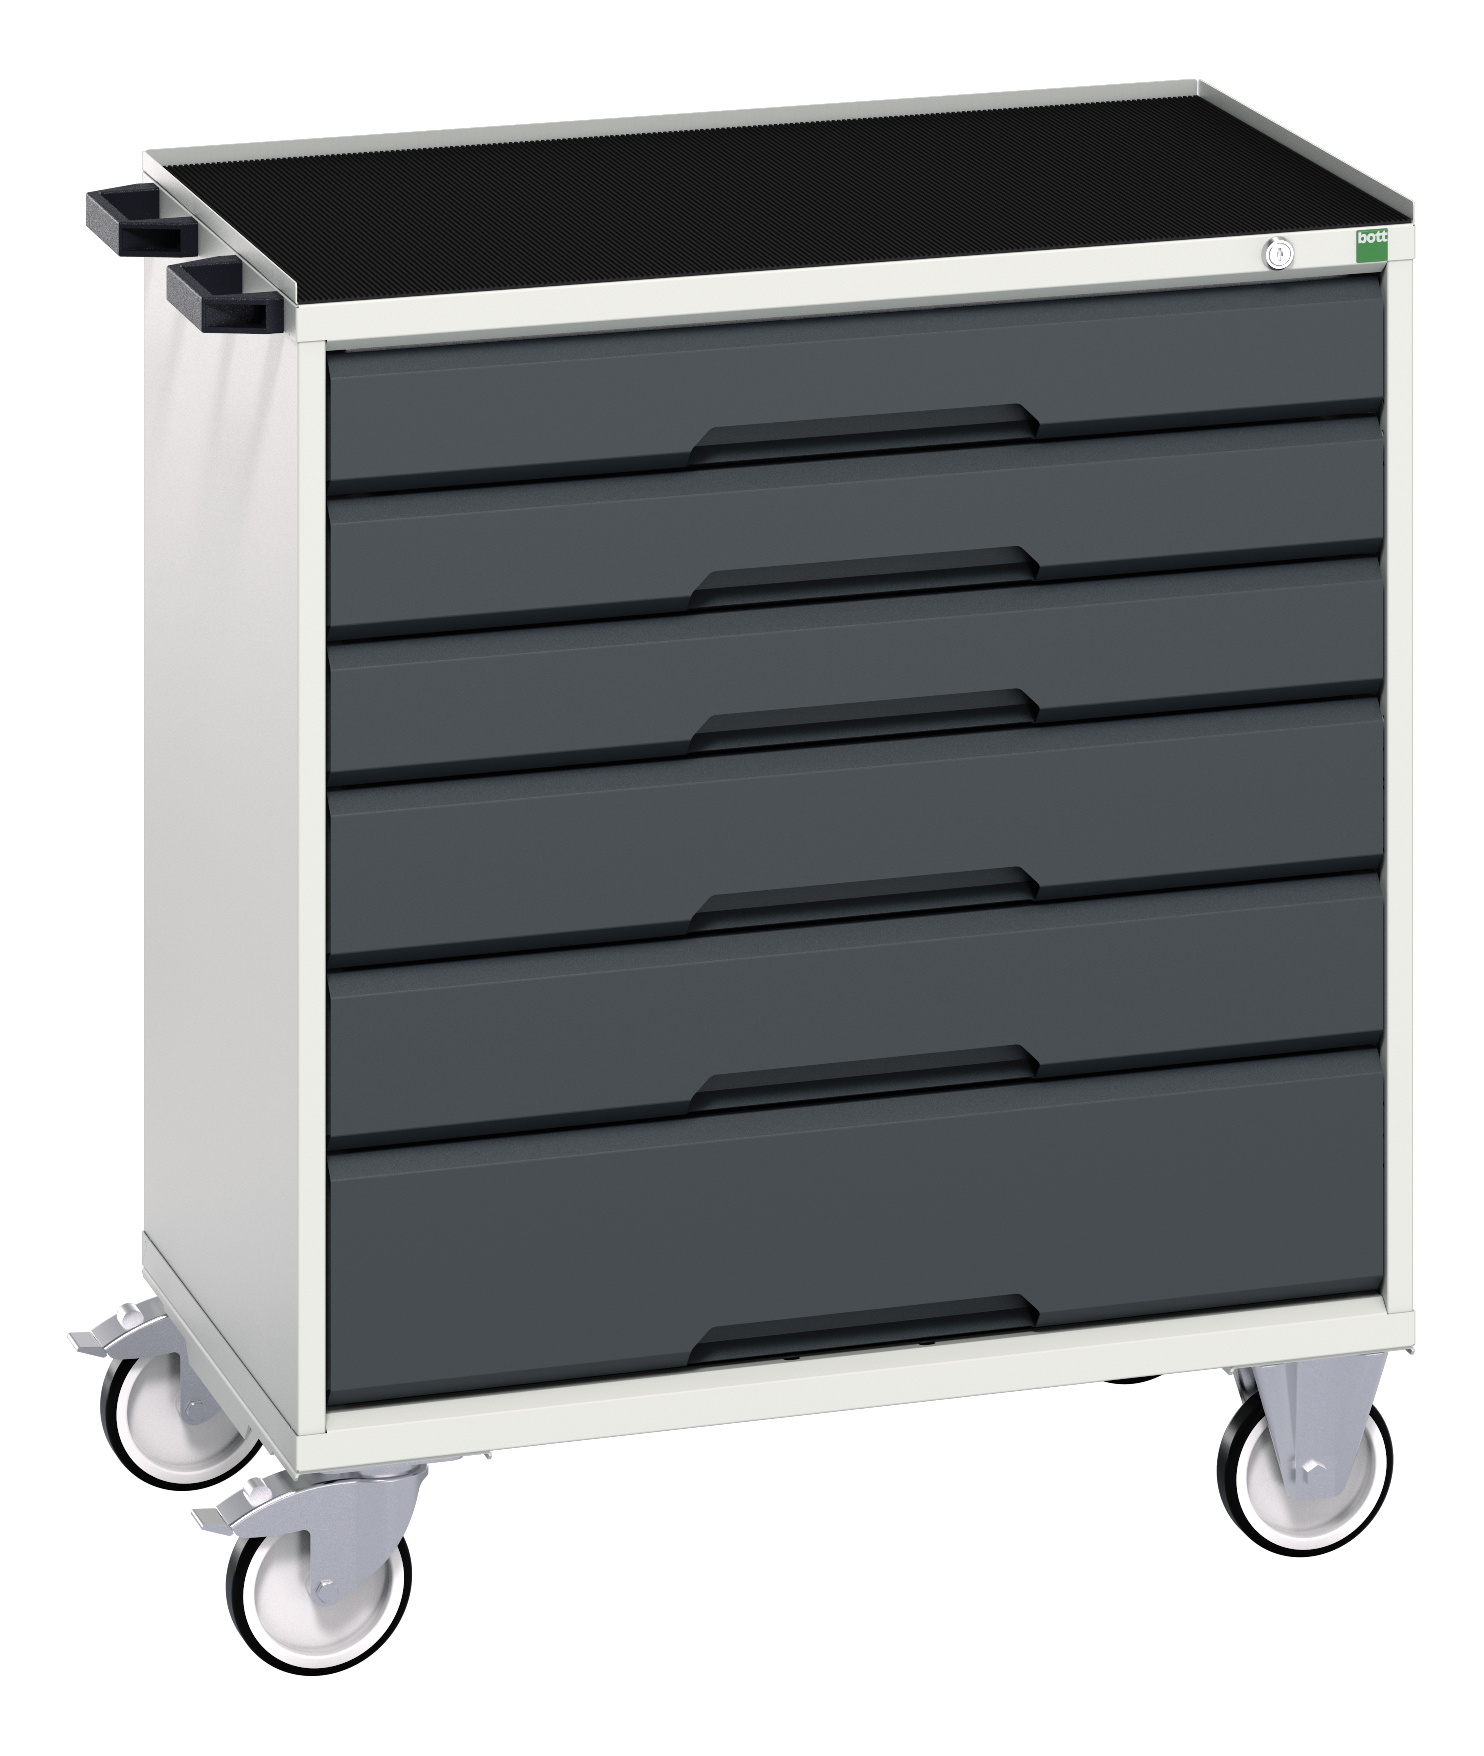 Bott Verso Mobile Drawer Cabinet With 6 Drawers & Top Tray With Mat - 16927005.19